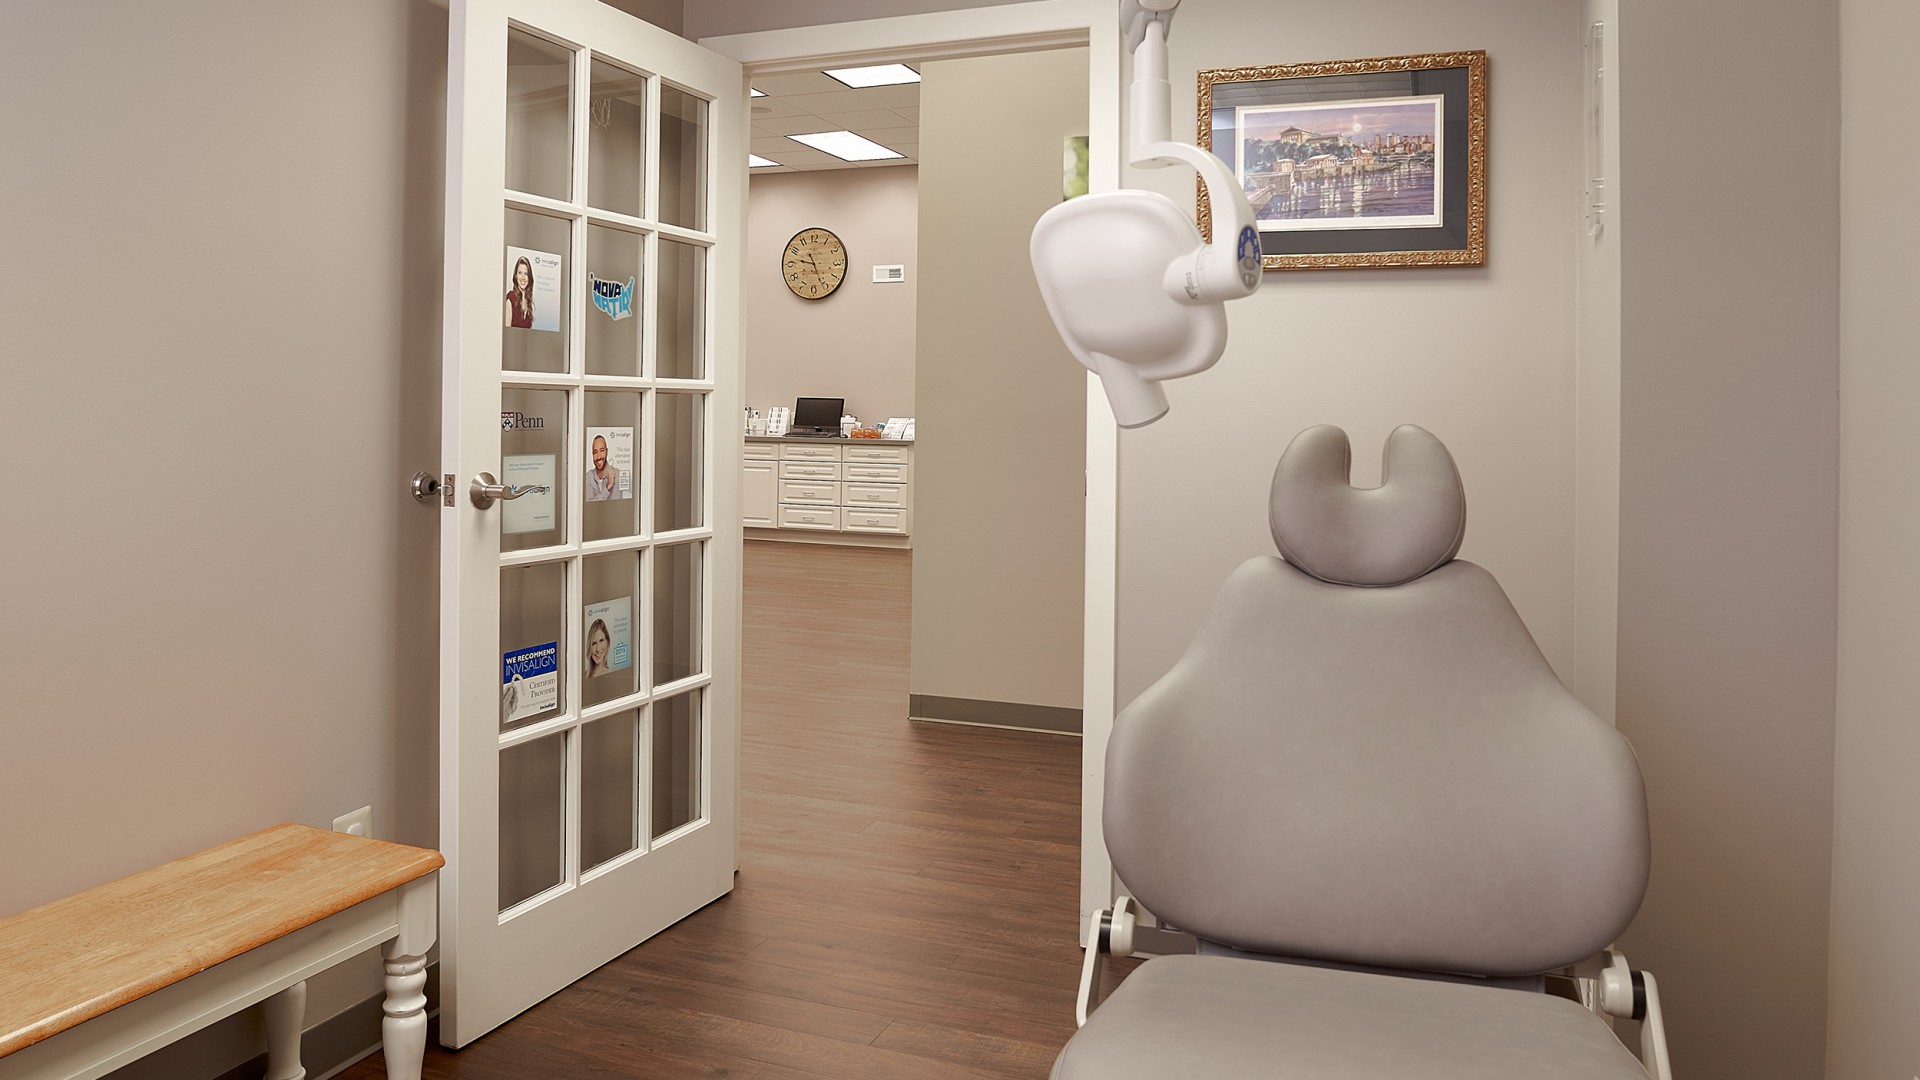 Picture of the consultation room, Mongiovi Orthodontics, West Chester PA Orthodontist, Wilmington DE Orthodontist, Kennett Square Orthodontist, Chadds Ford Orthodontist